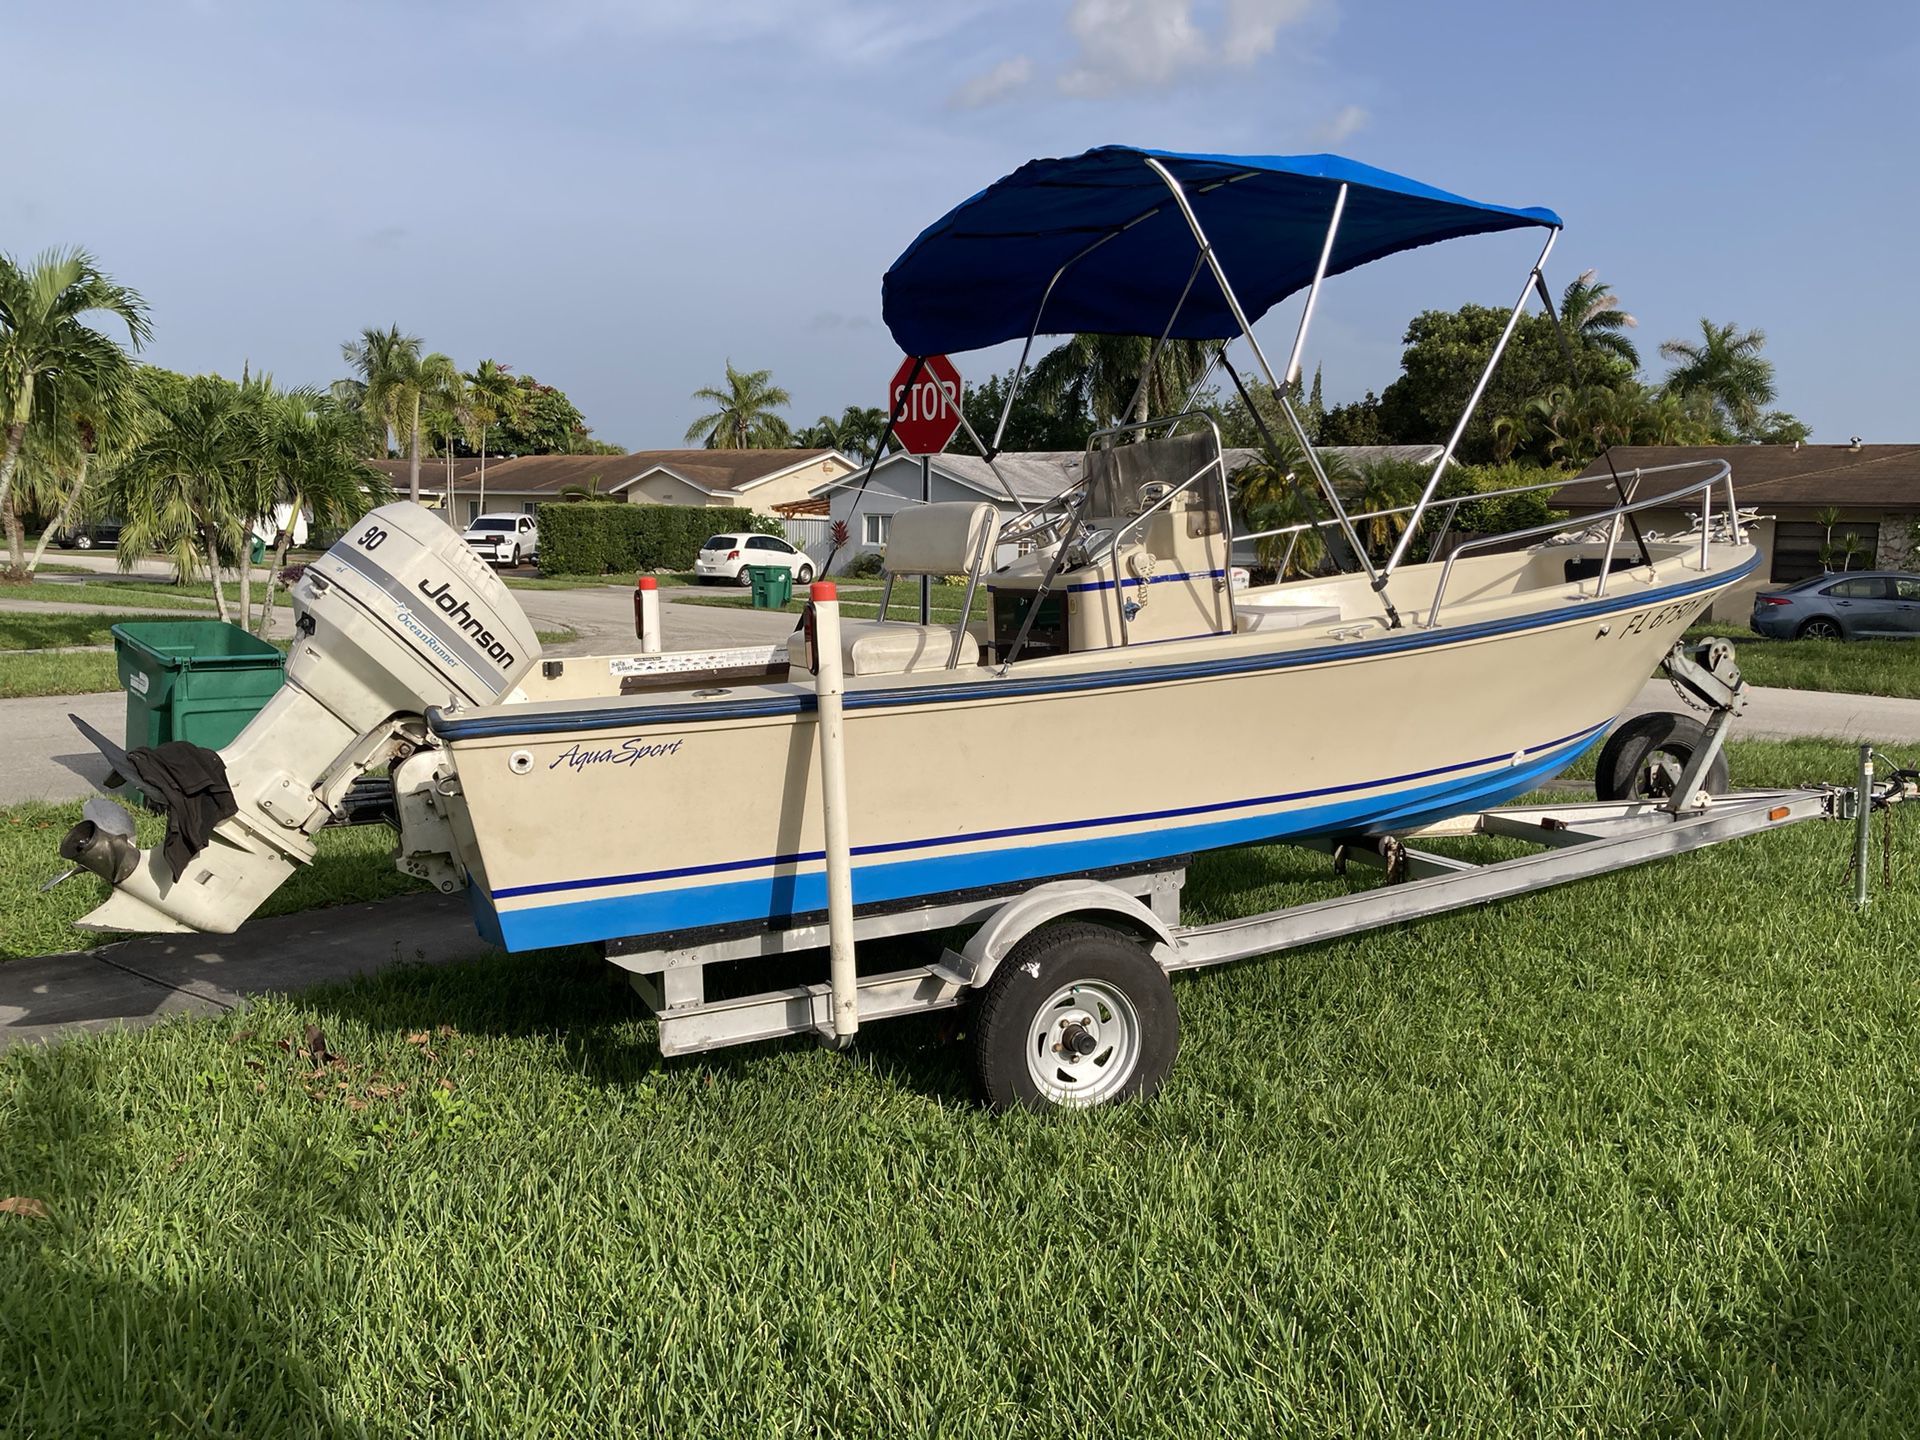 Aqua Sport 17’ With Johnson 90 HP , 27 Gallons Gas Tank,Aluminum Trailer With New Lights, Bimini Top Ready To Fish Kendall West Area 